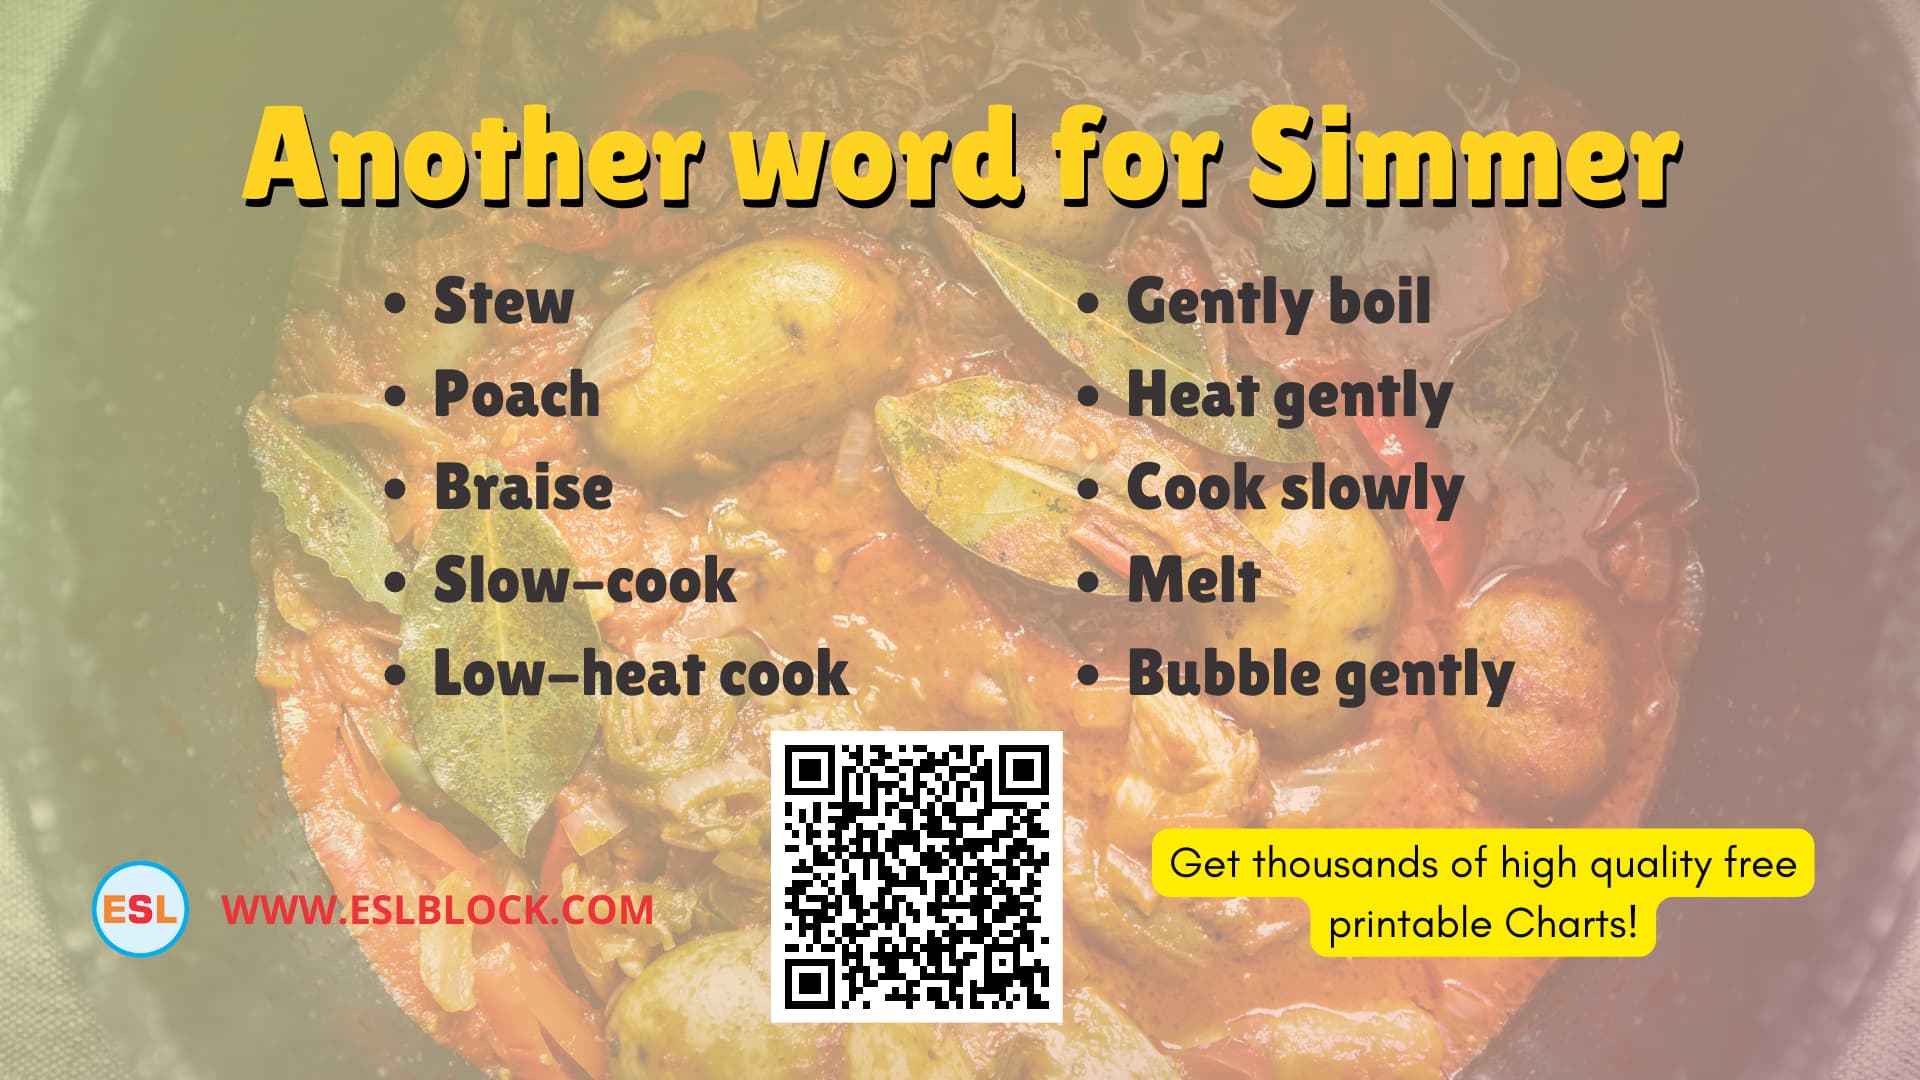 What is another word for simmer